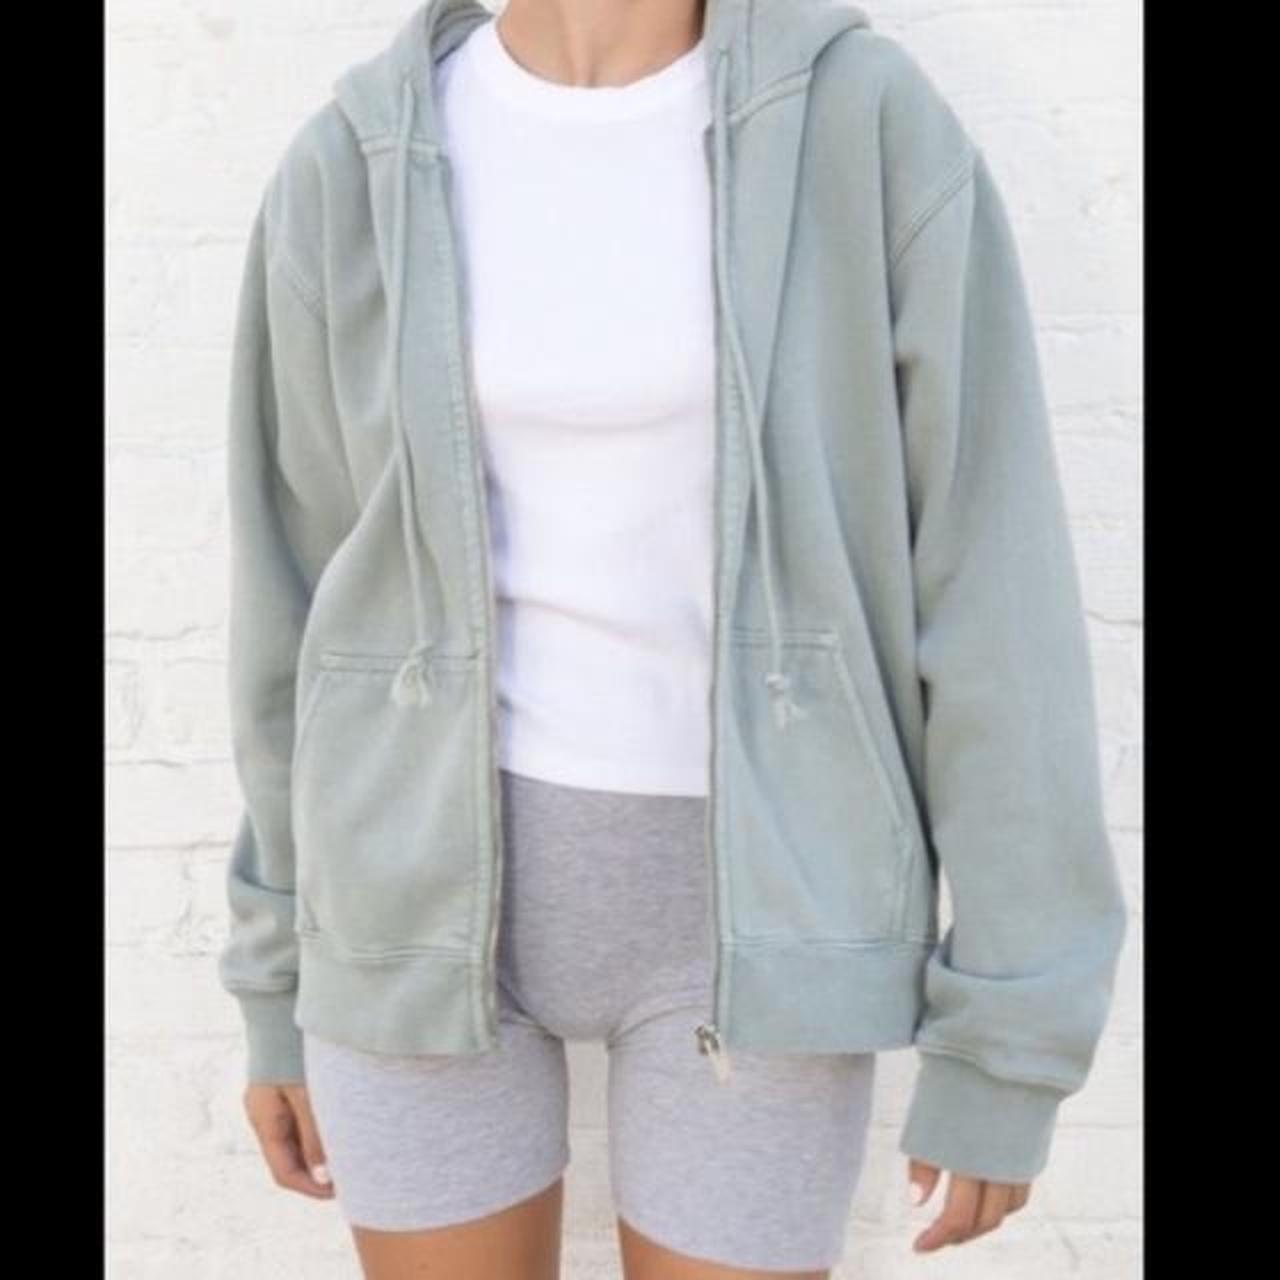 My exact crop hoodie is a Brandy Melville/John Galt find at PacSun and  unable to link but linked similar affordable options!   @liketoknow.…